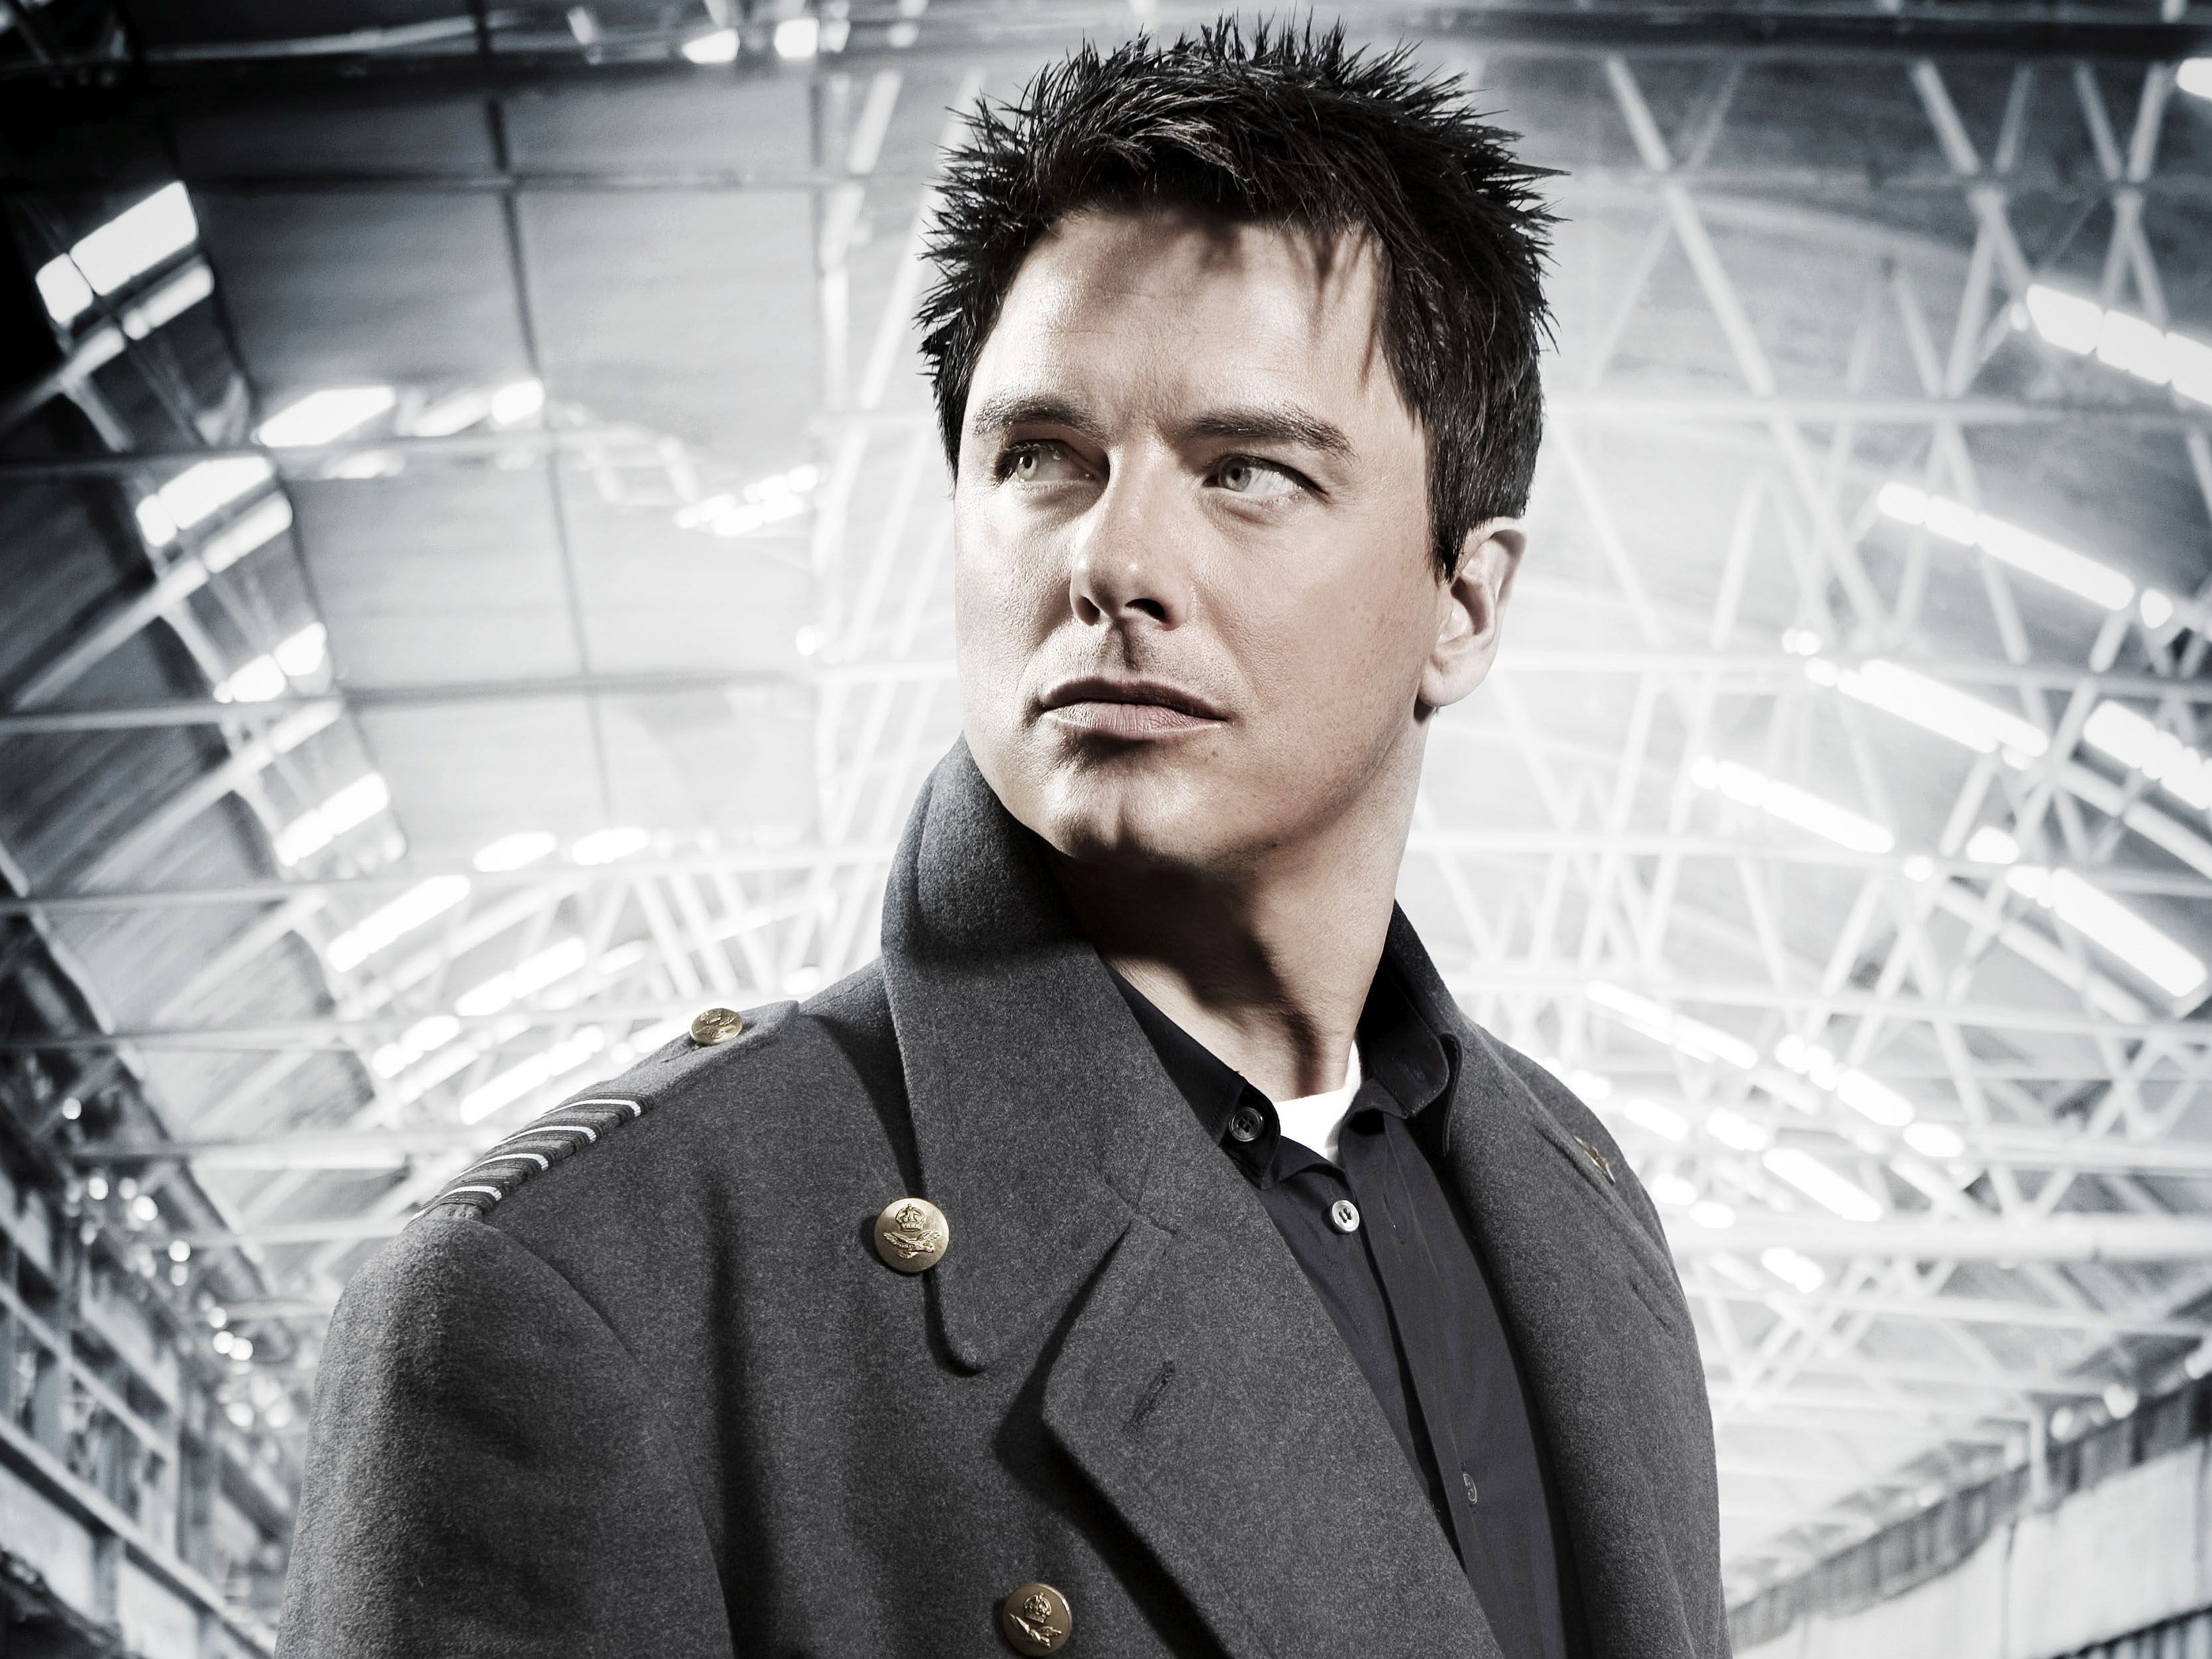 torchwood, portrait, headshot, one person, young adult, indoors